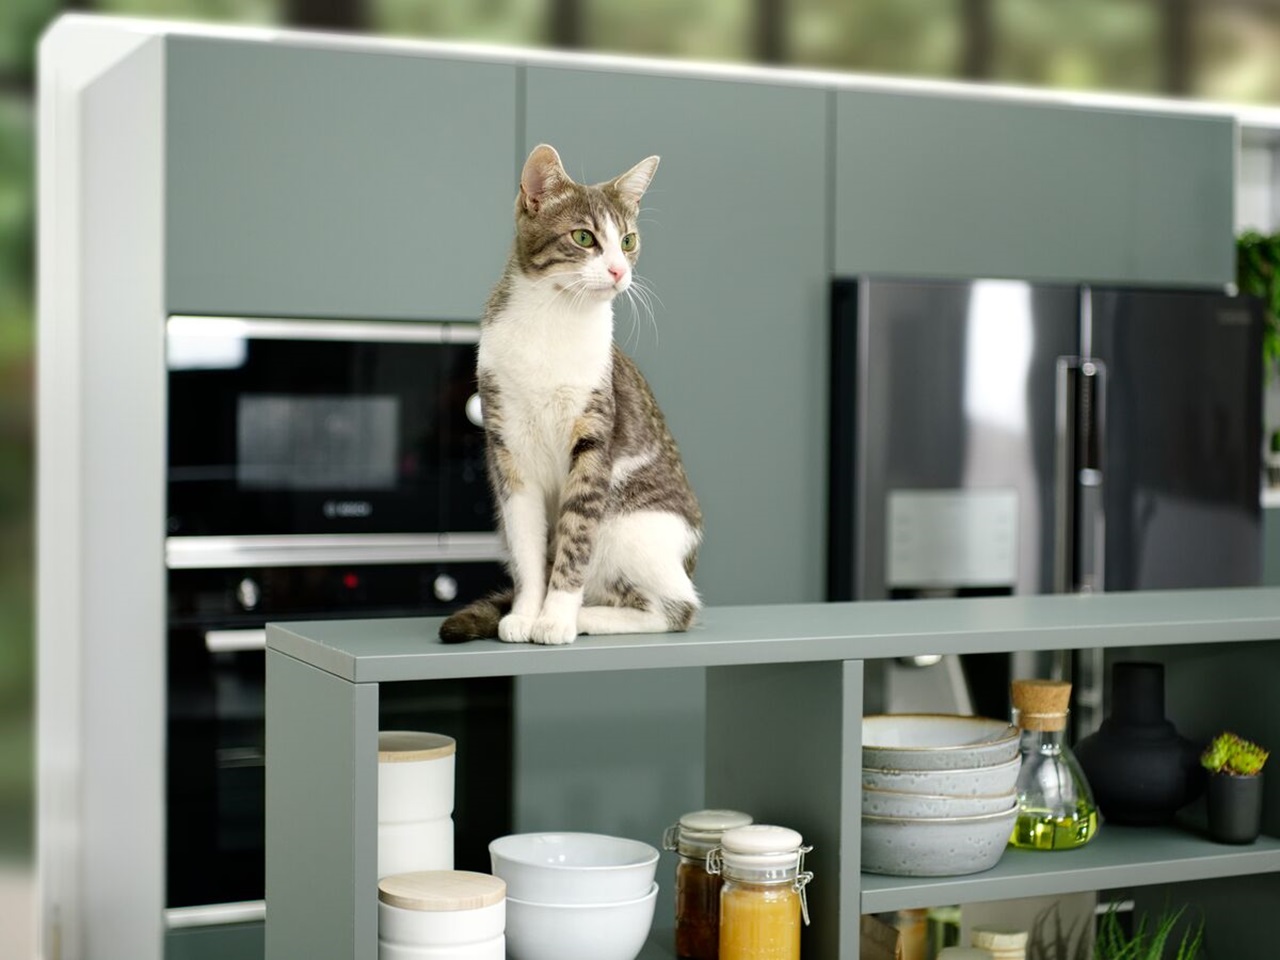 High kitchen shelf ideal for your cat